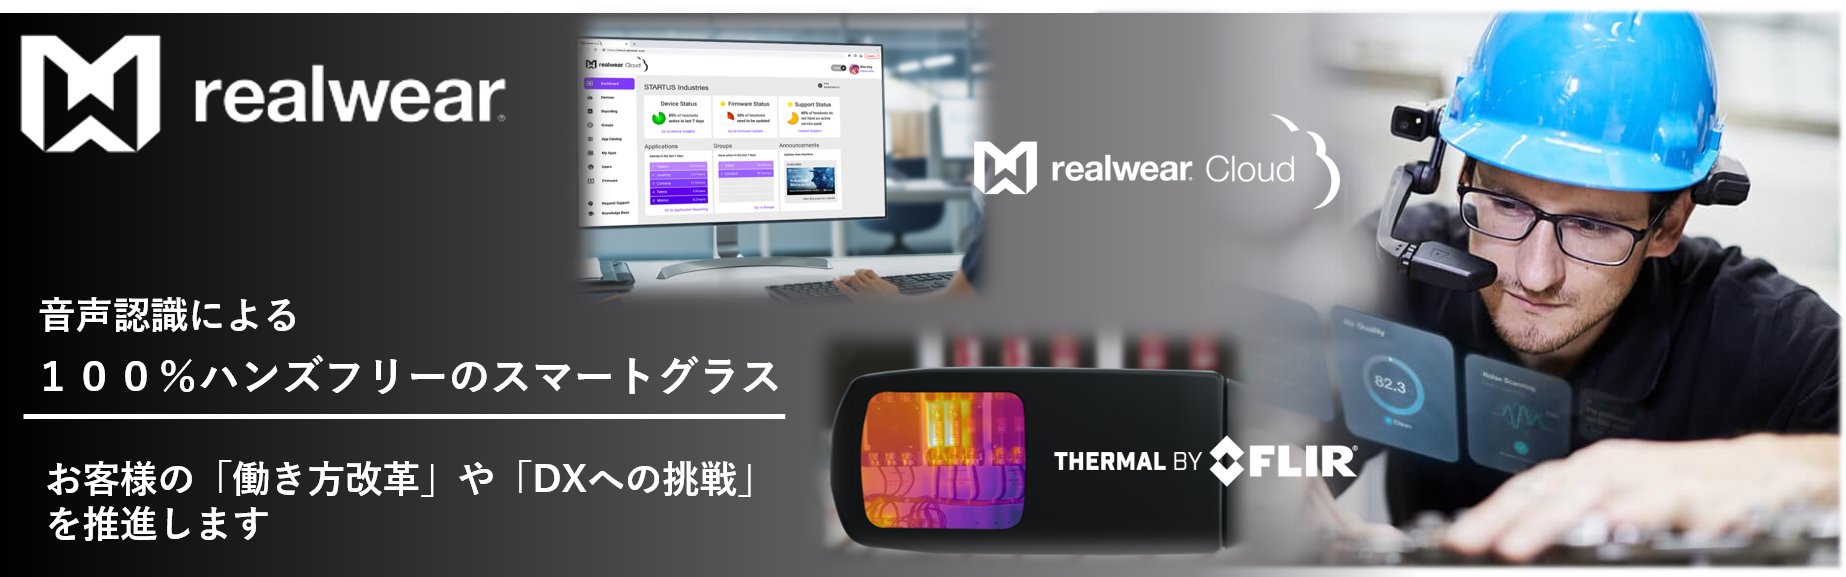 img_banner_iot_realwear2.png